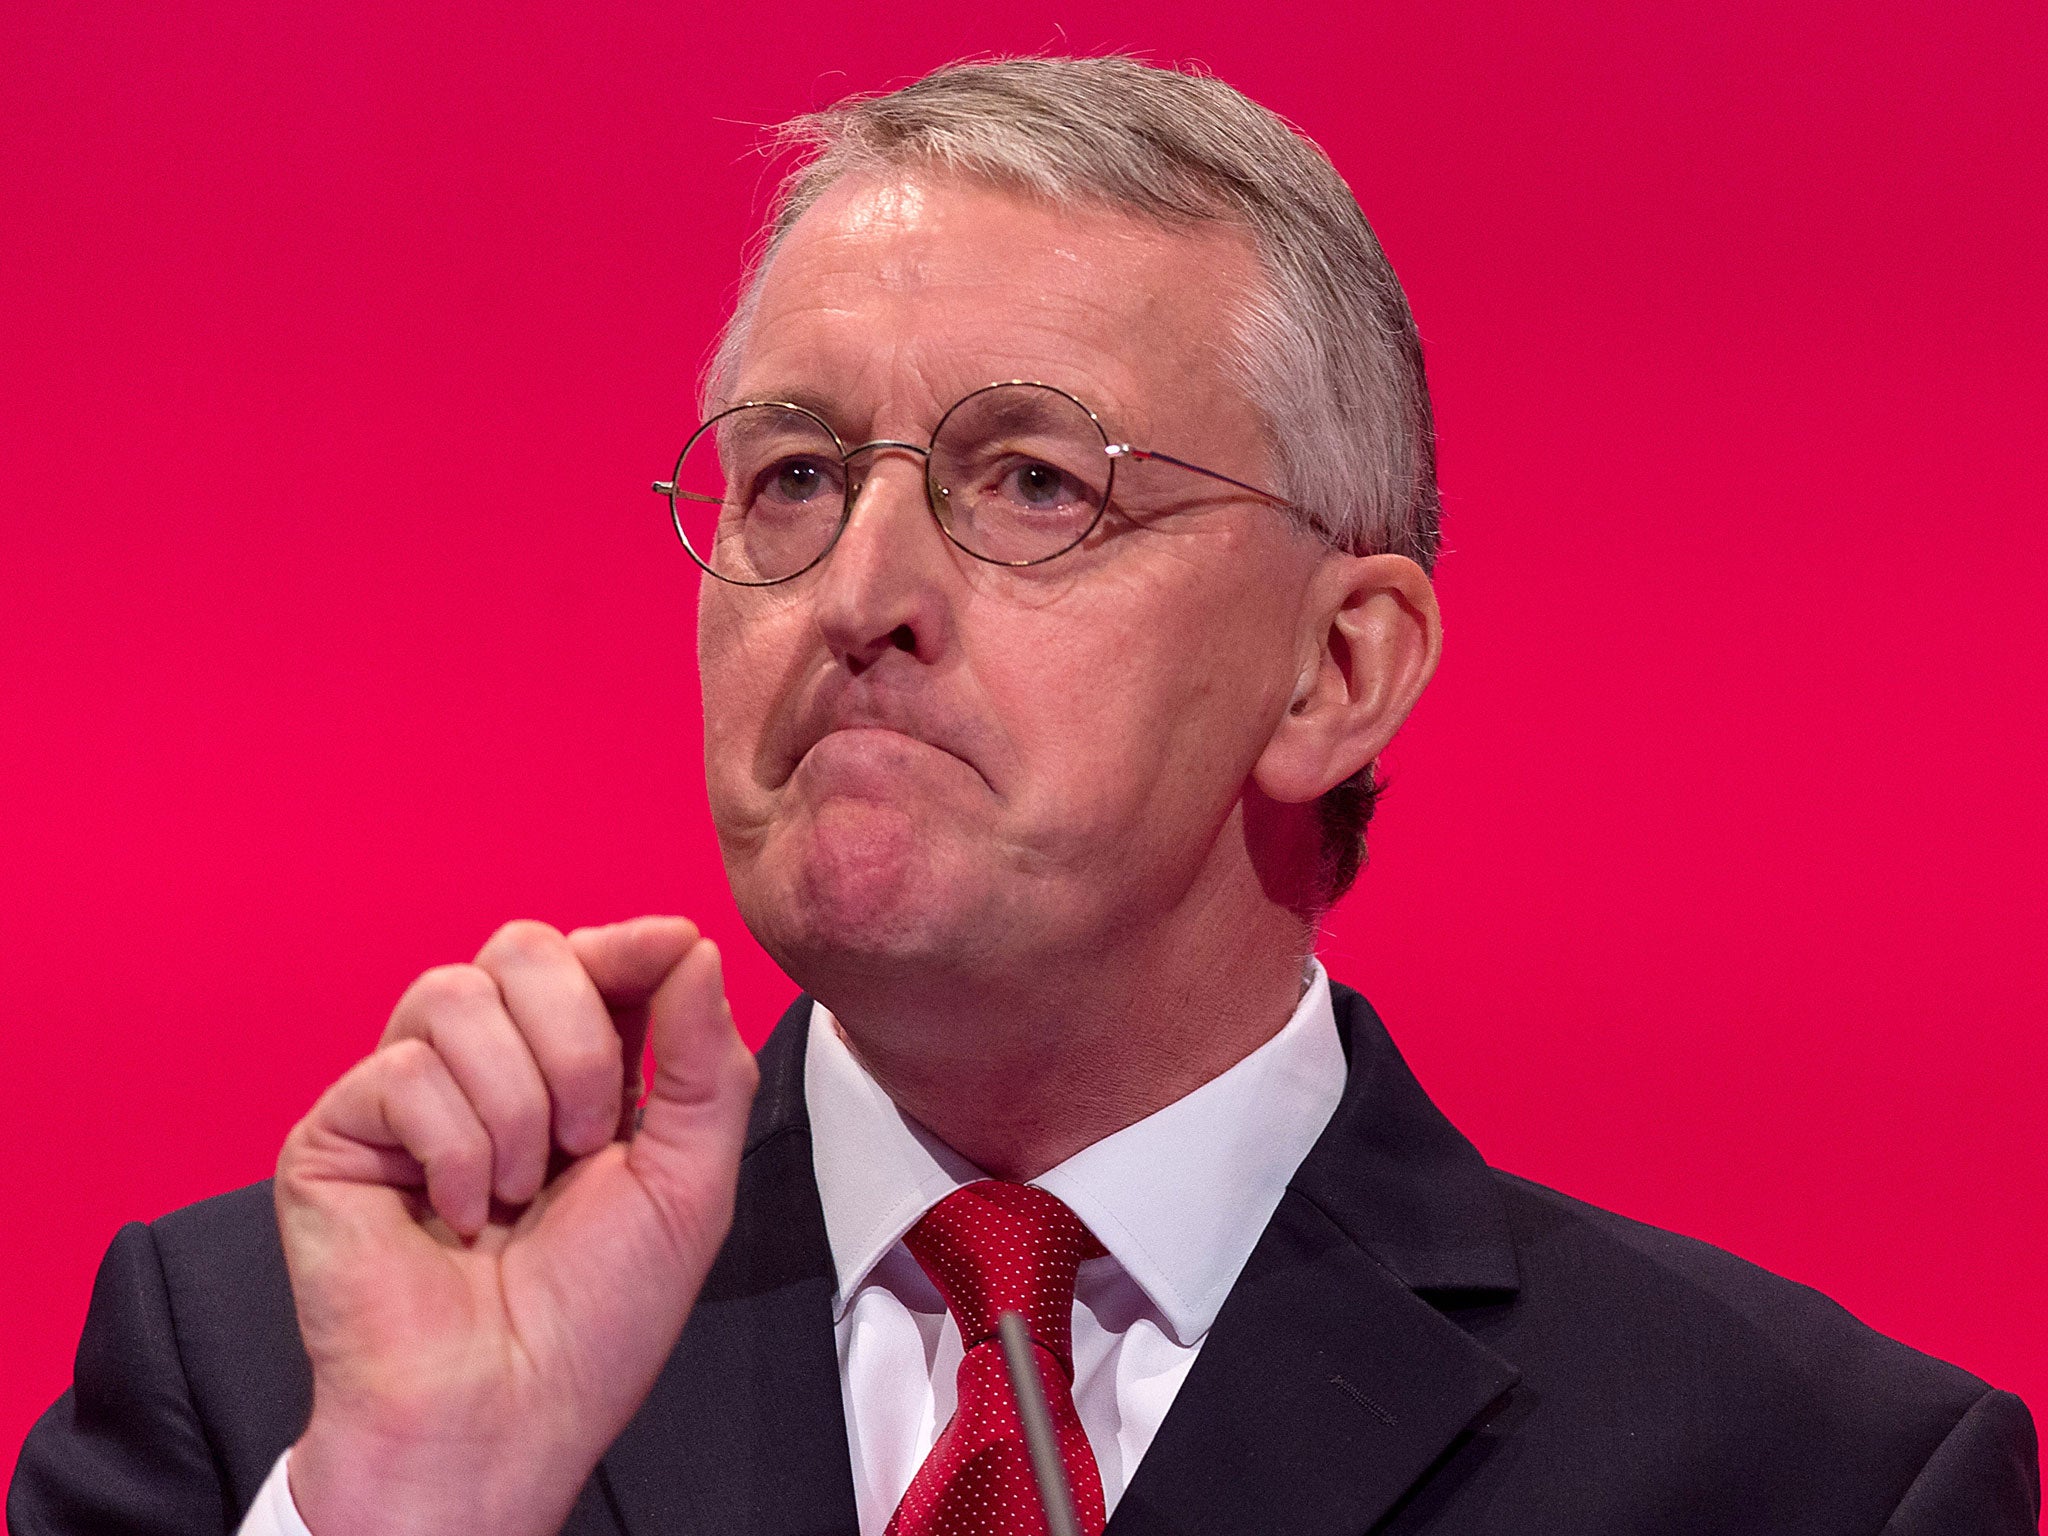 MPs elected Hilary Benn, who was sacked by Jeremy Corbyn, to head the committee that will scrutinise Brexit